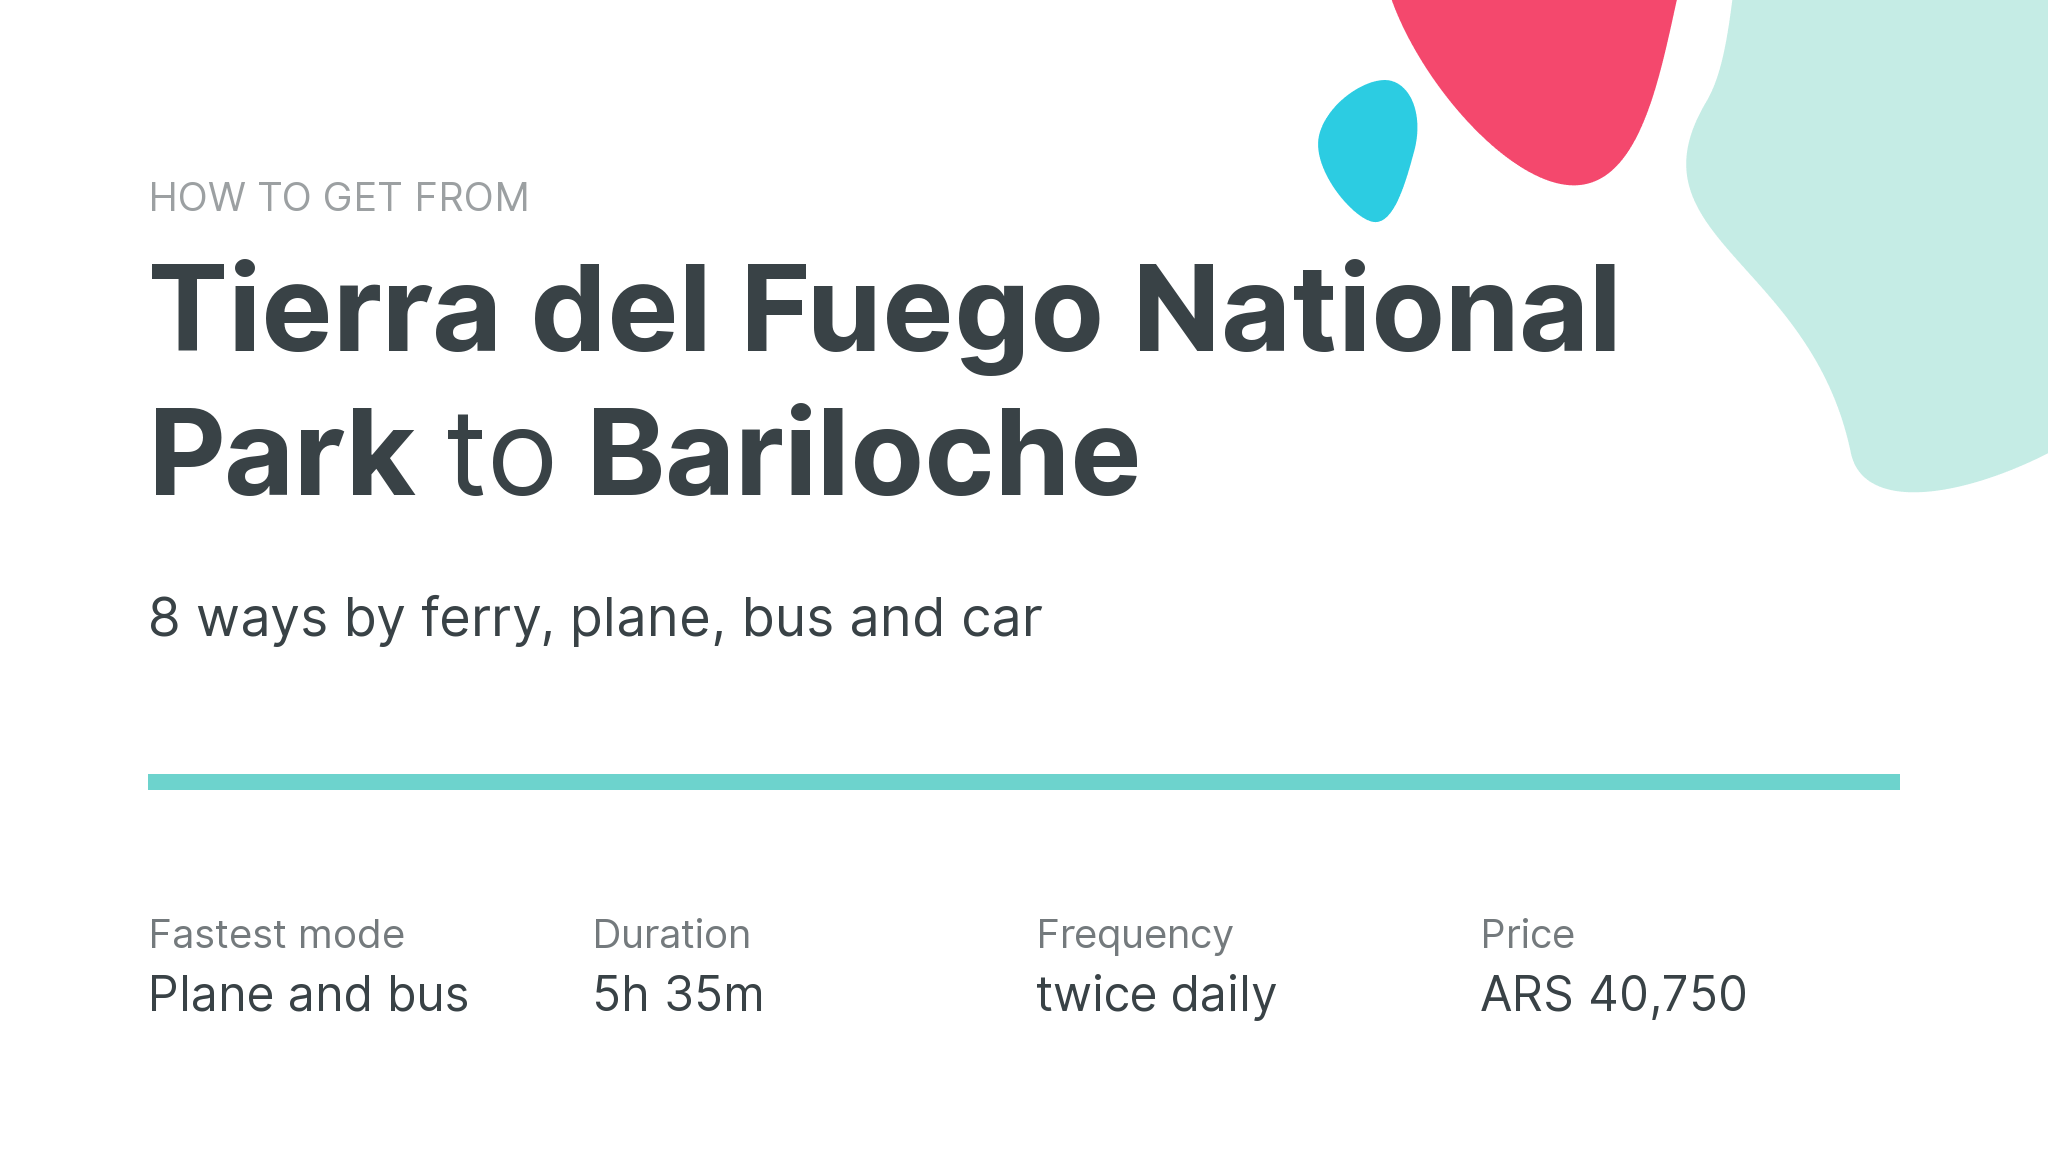 How do I get from Tierra del Fuego National Park to Bariloche